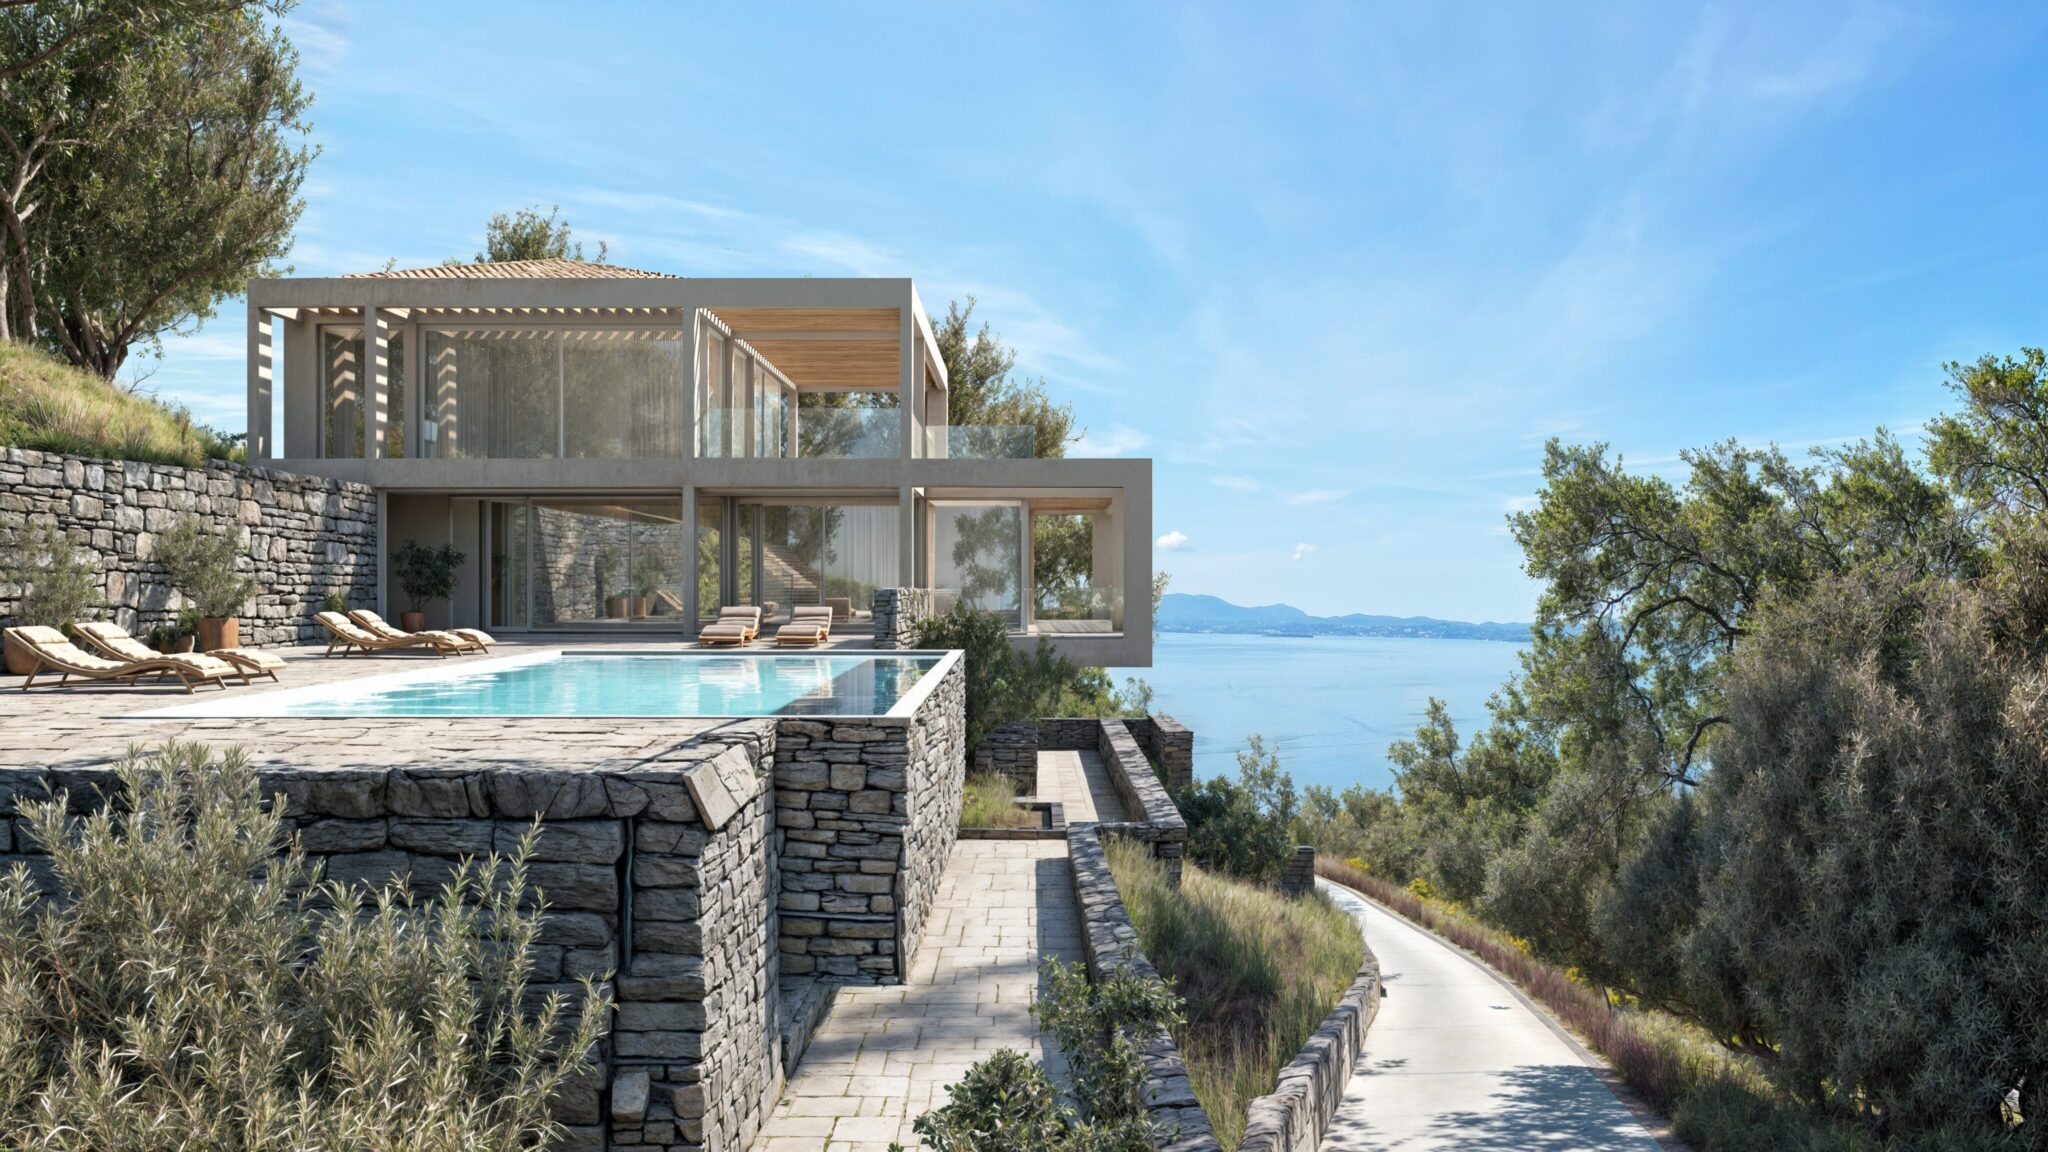 Visualization of a Home in the Scenic Greek Nature